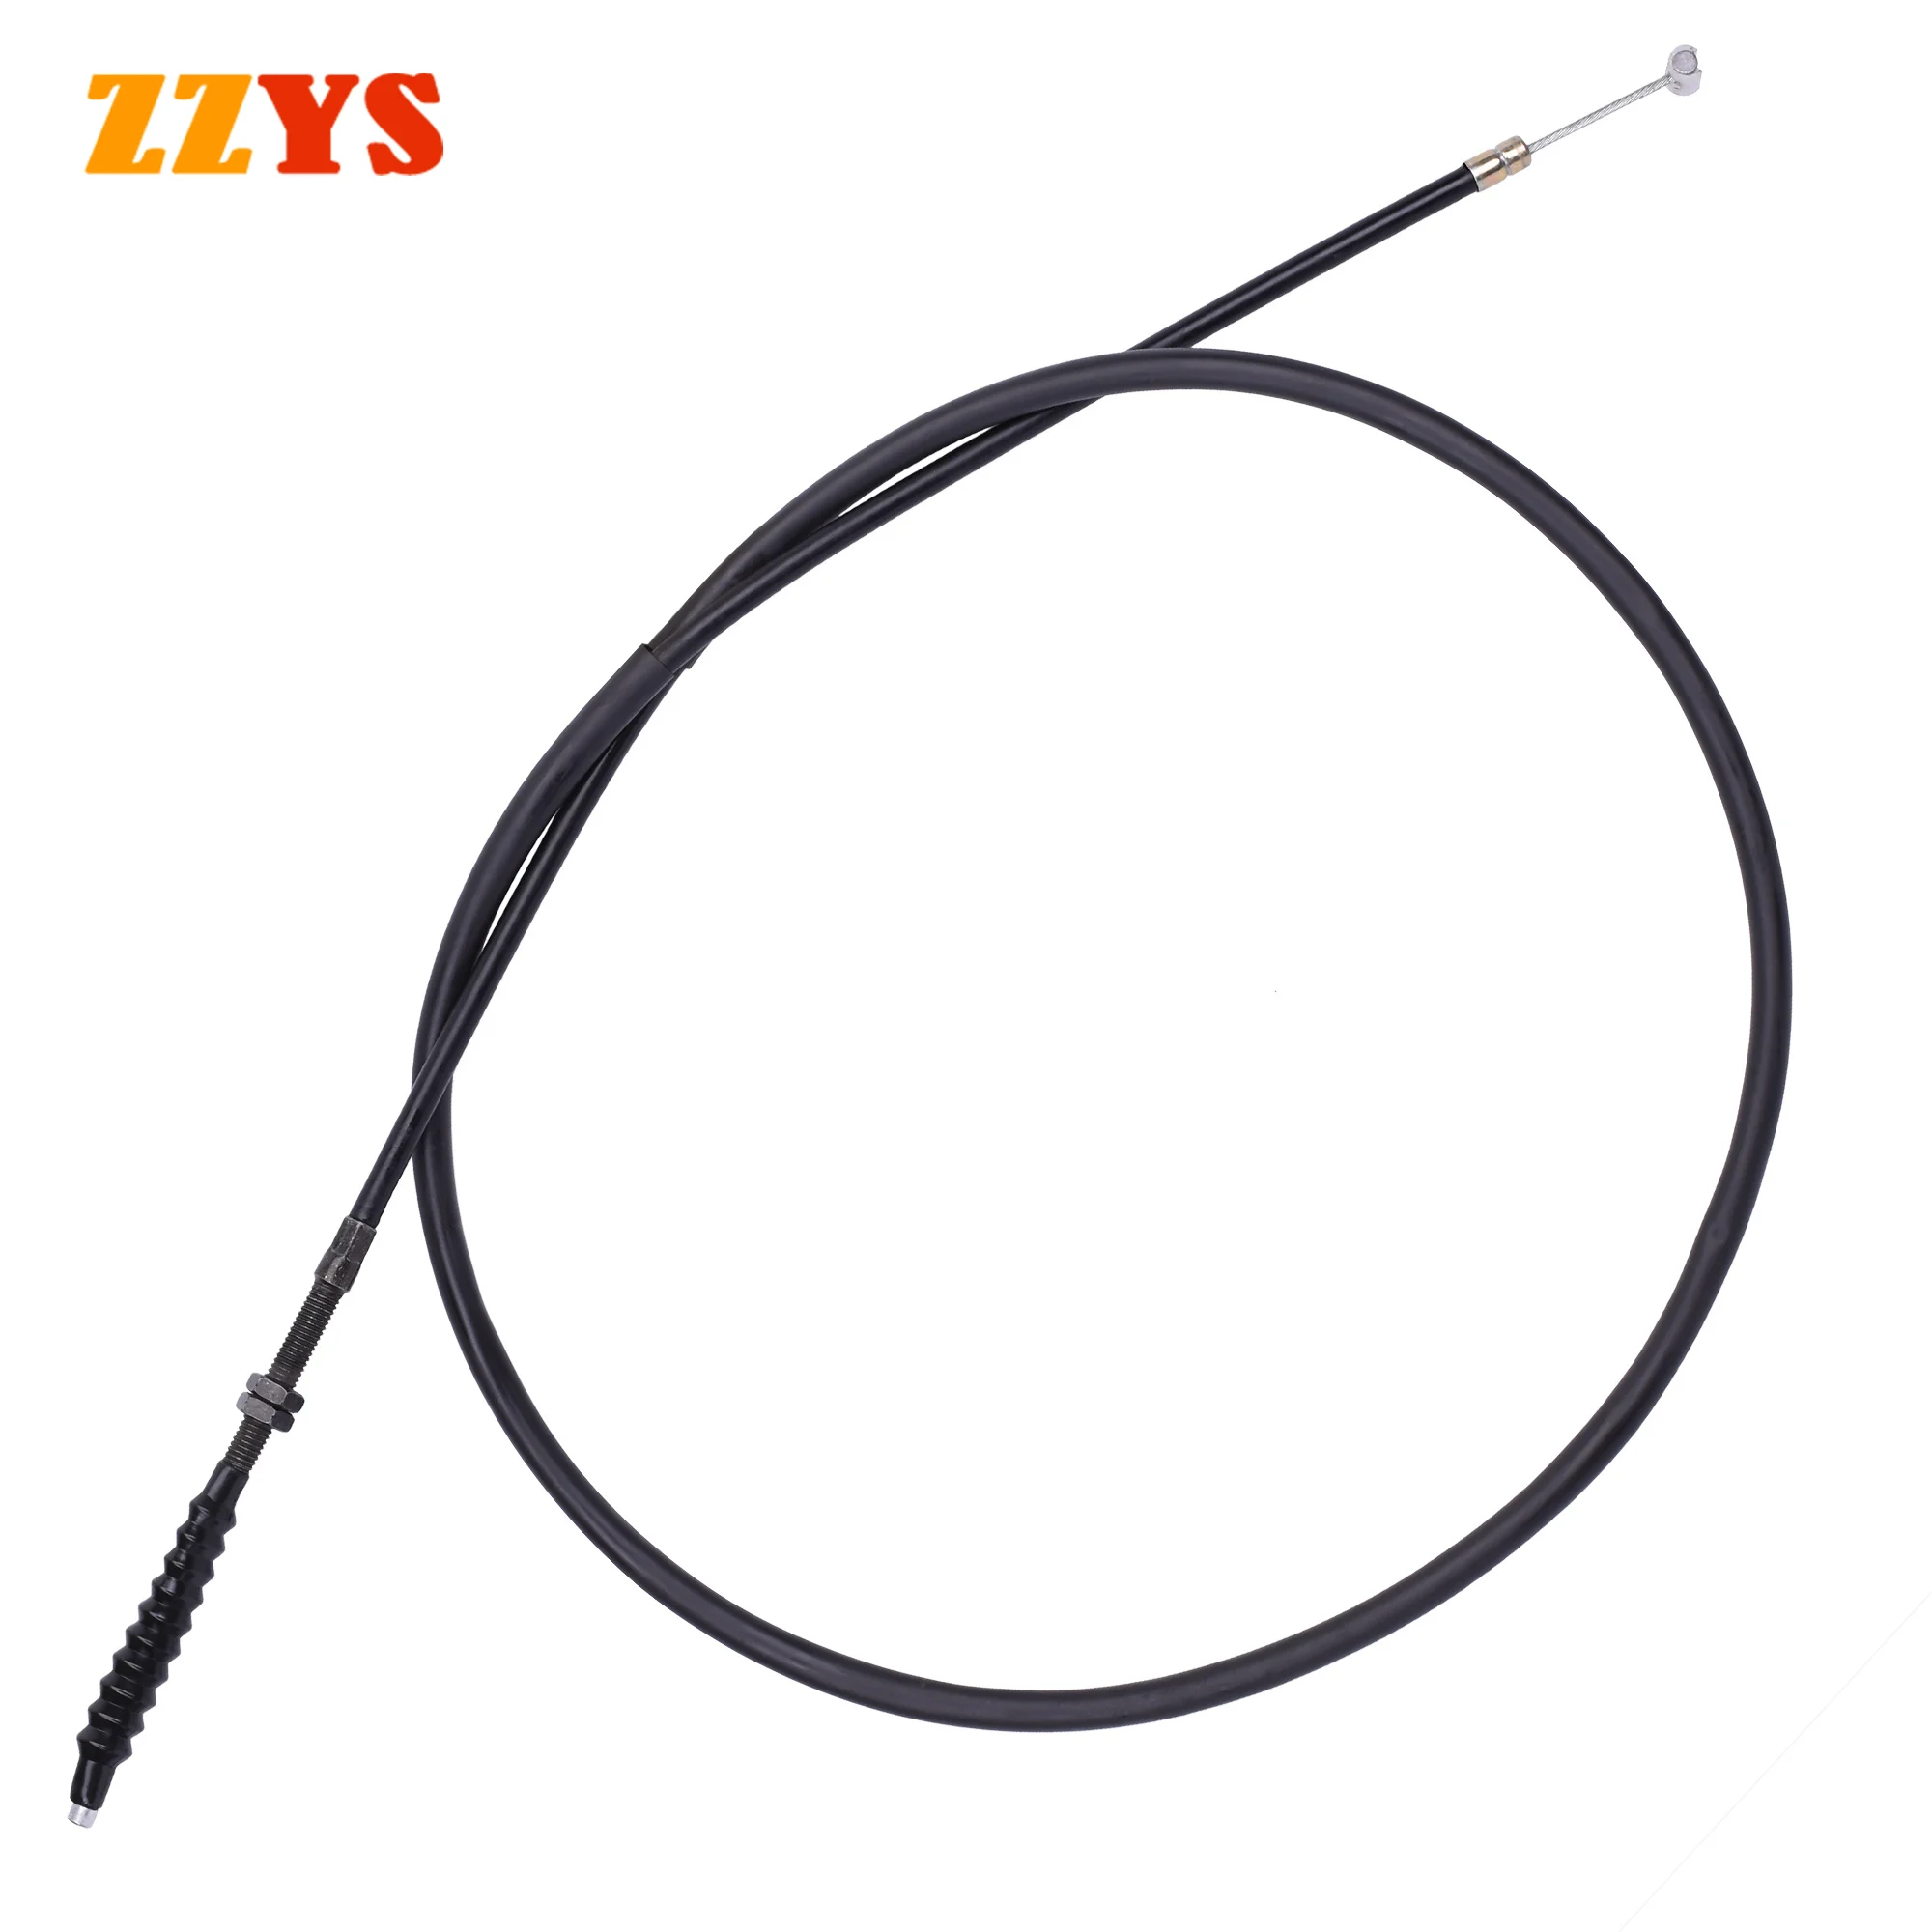 

143cm Motorcycle Clutch Cable for Yamaha 1000CC YZF1000 YZF-R1 YZF 1000 R1 2009-2016 Adjustable Control Line Wire